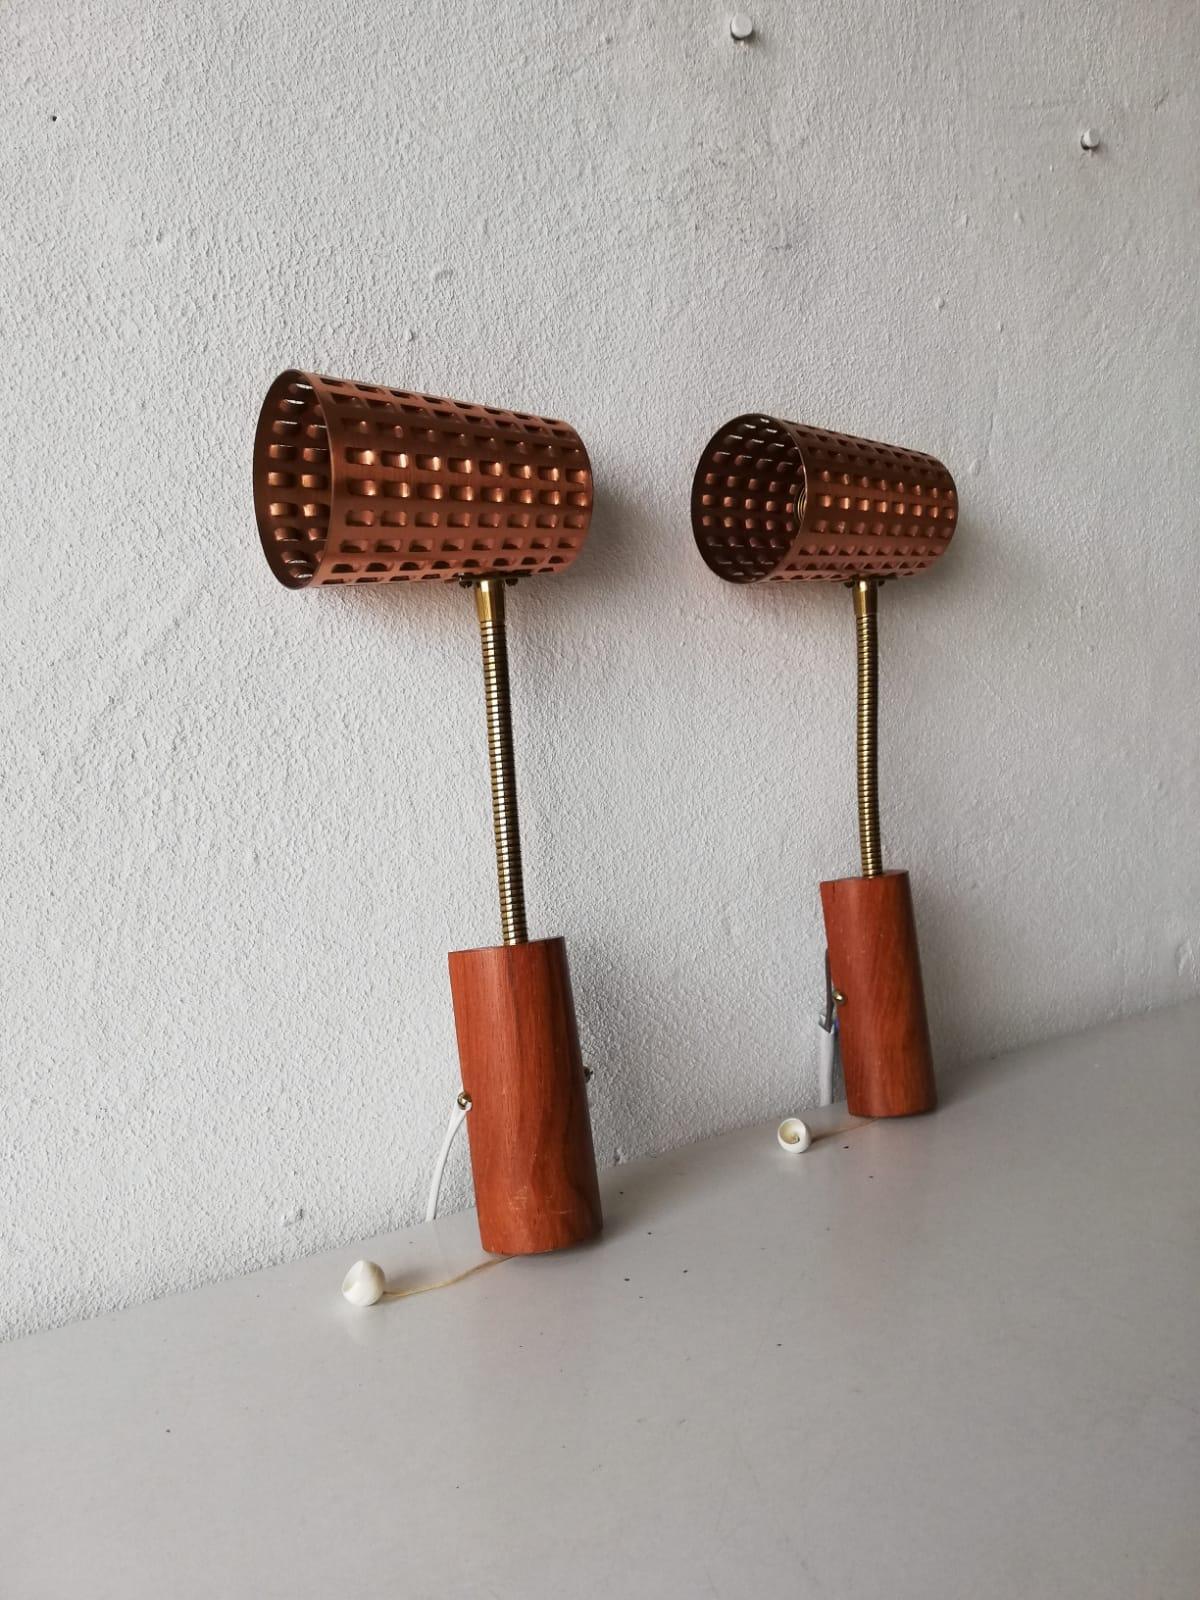 Mid-Century Modern scandinavian copper metal & teak pair of sconces, 1950s Denmark

Rare and Minimalist wall lamps.

Lamps are in very good vintage condition.

These lamps works with E14 standard light bulbs. 
Wired and suitable to use in all